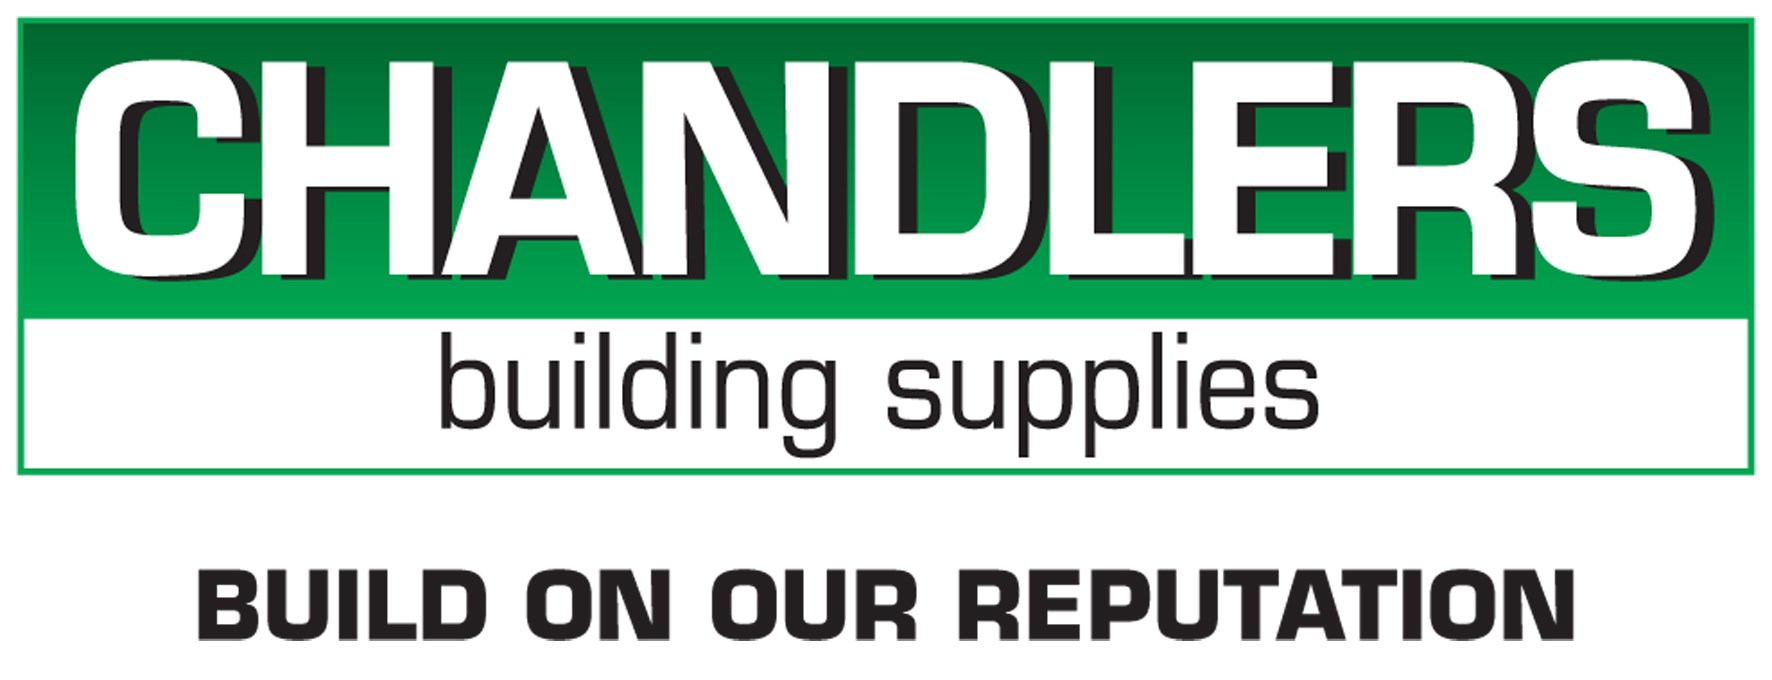 Chandlers Building Supplies Announces Charity Partner